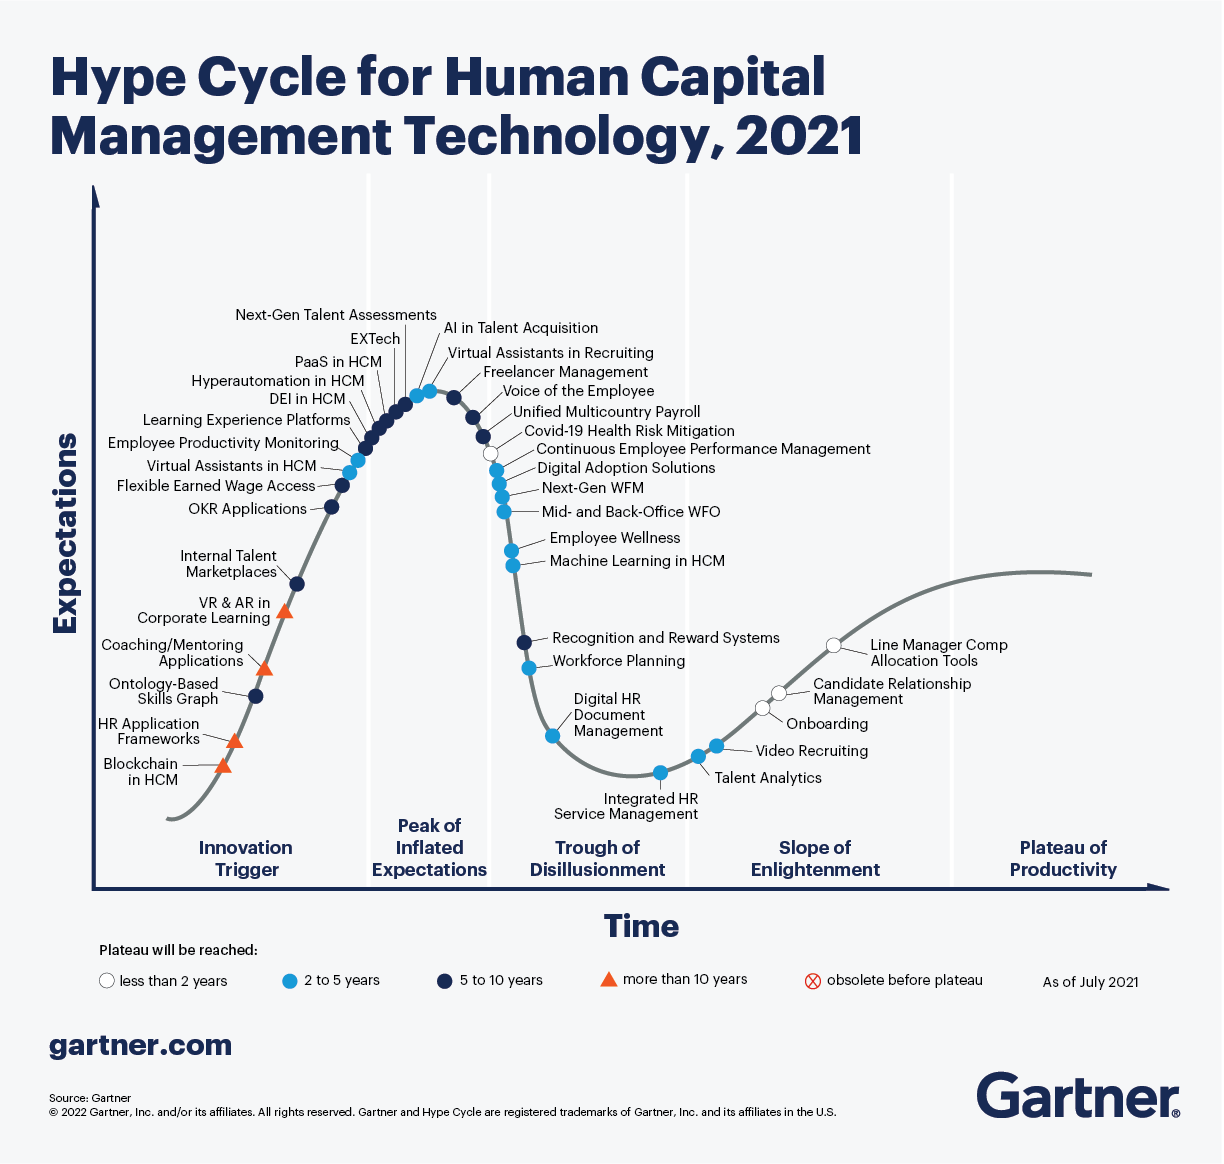 Hype Cycle for Human Capital Management Technology, 2021